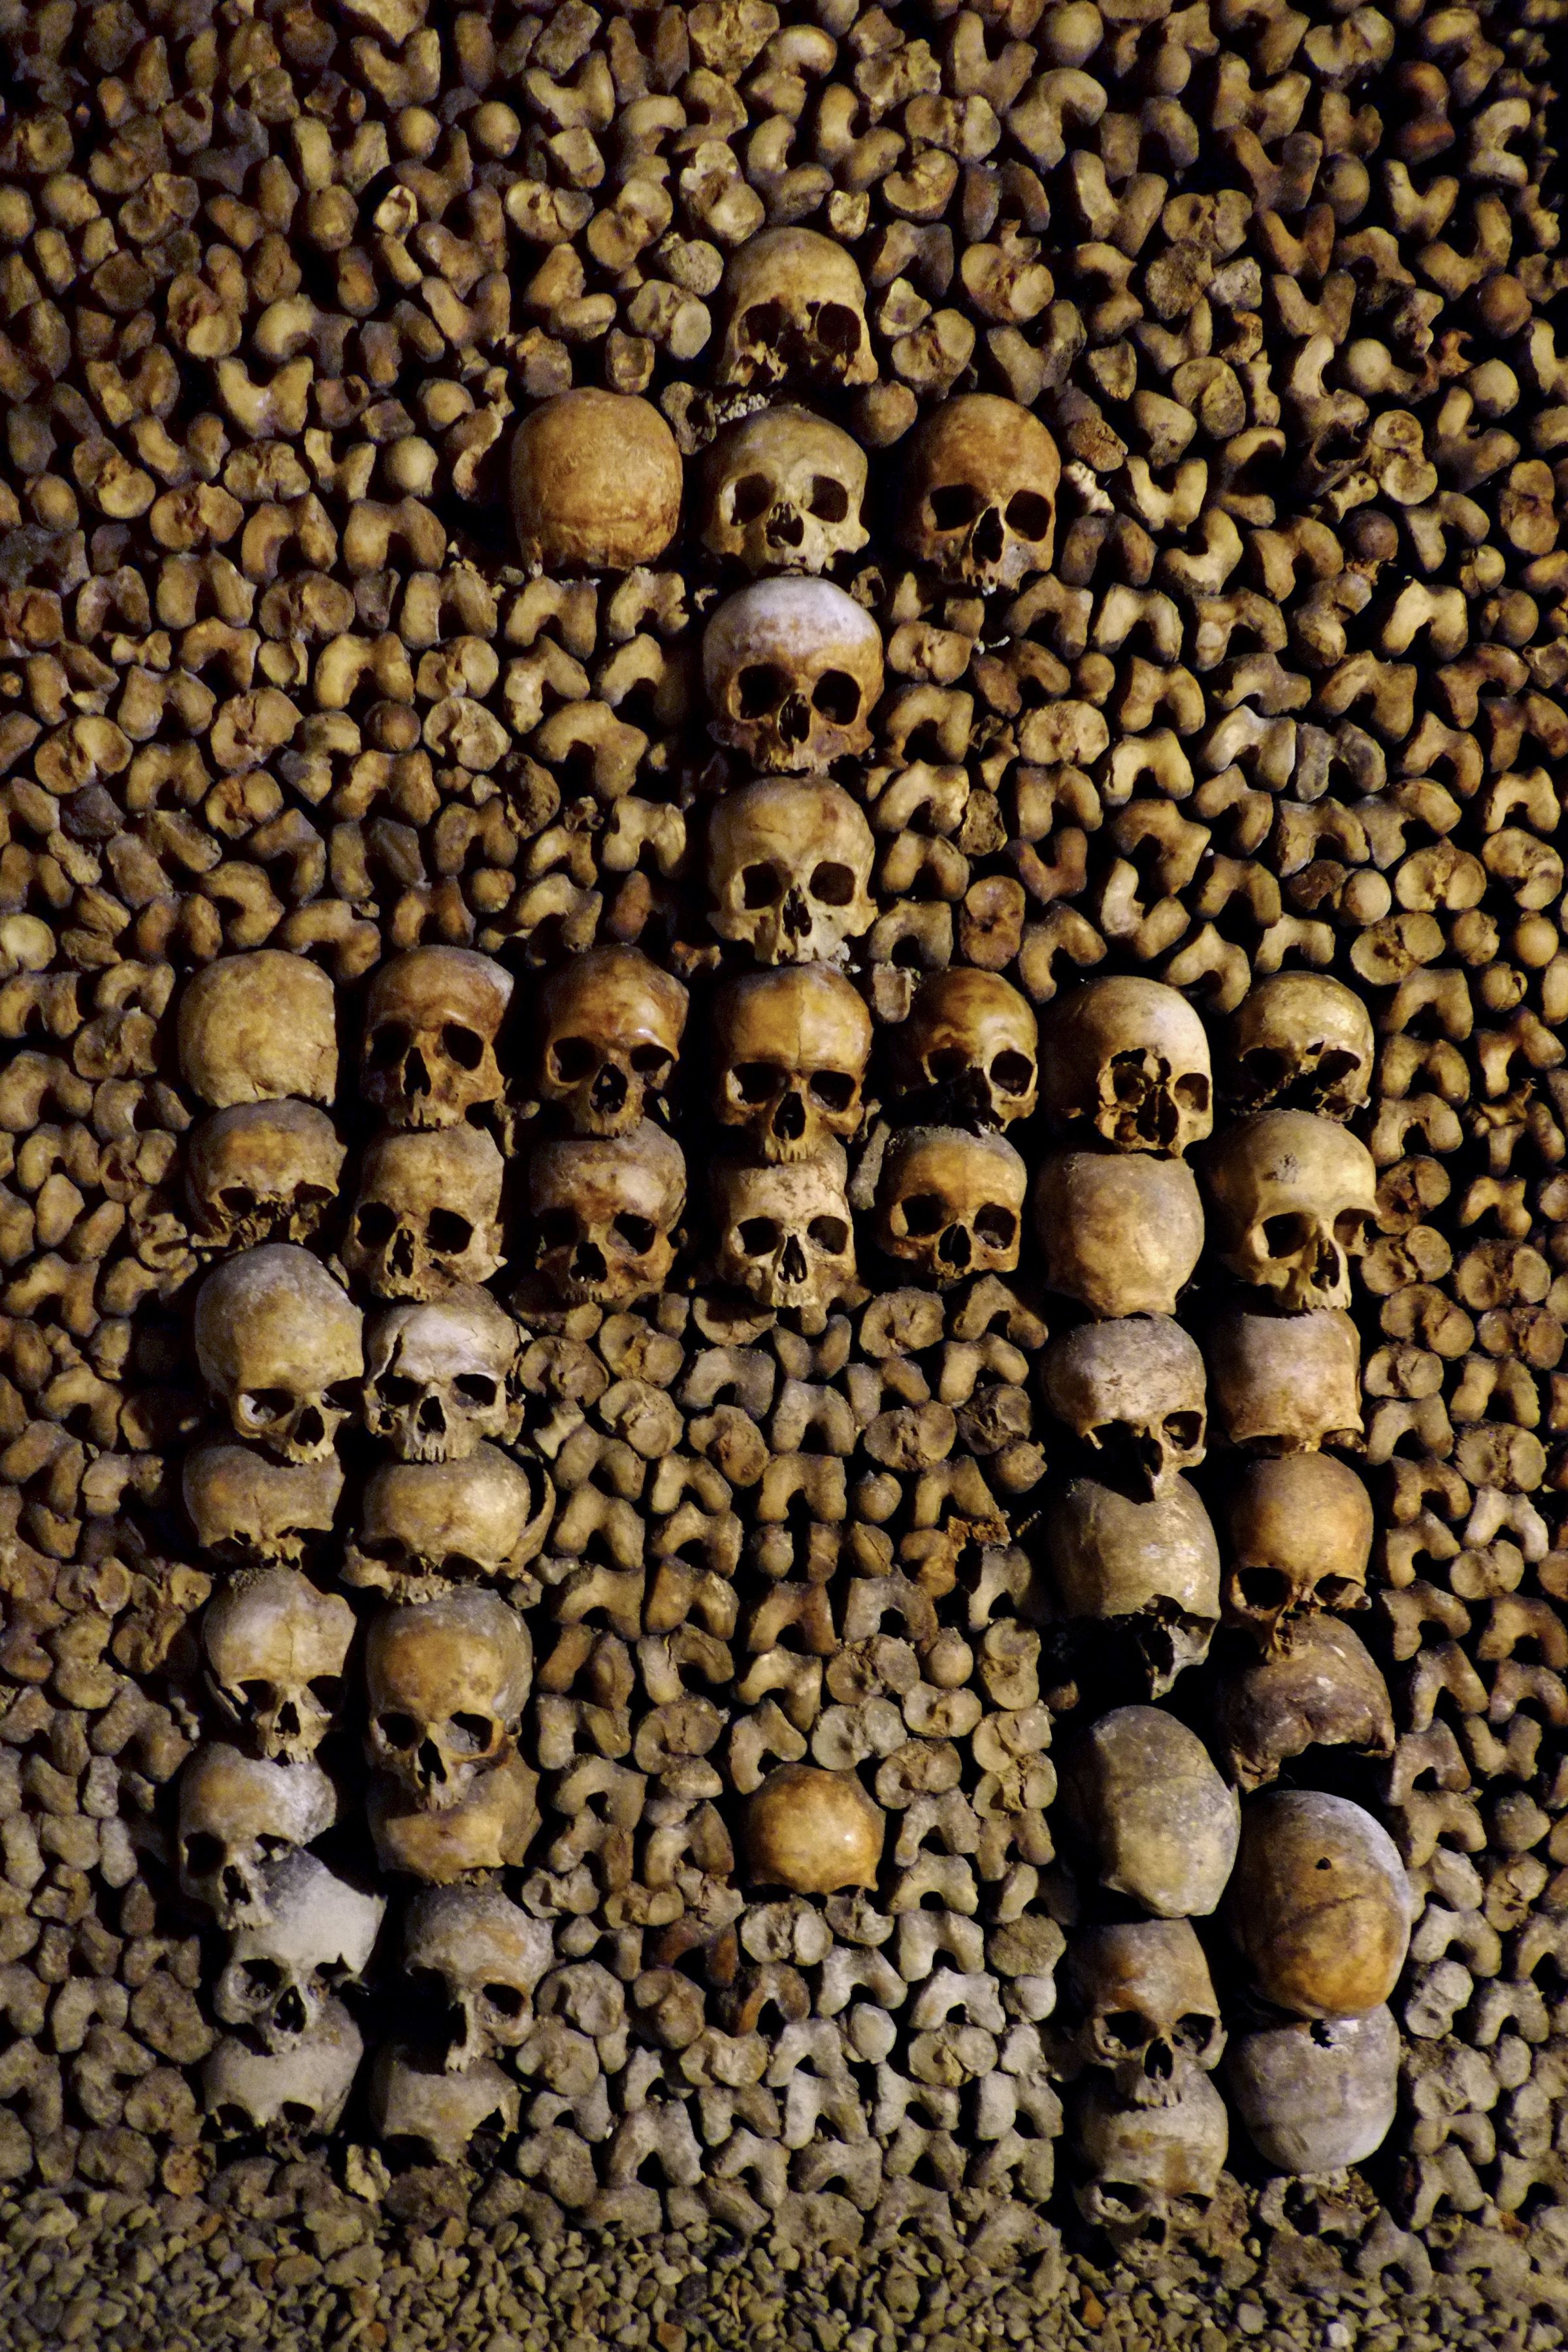 FRANCE-TOURISM-CATACOMBS